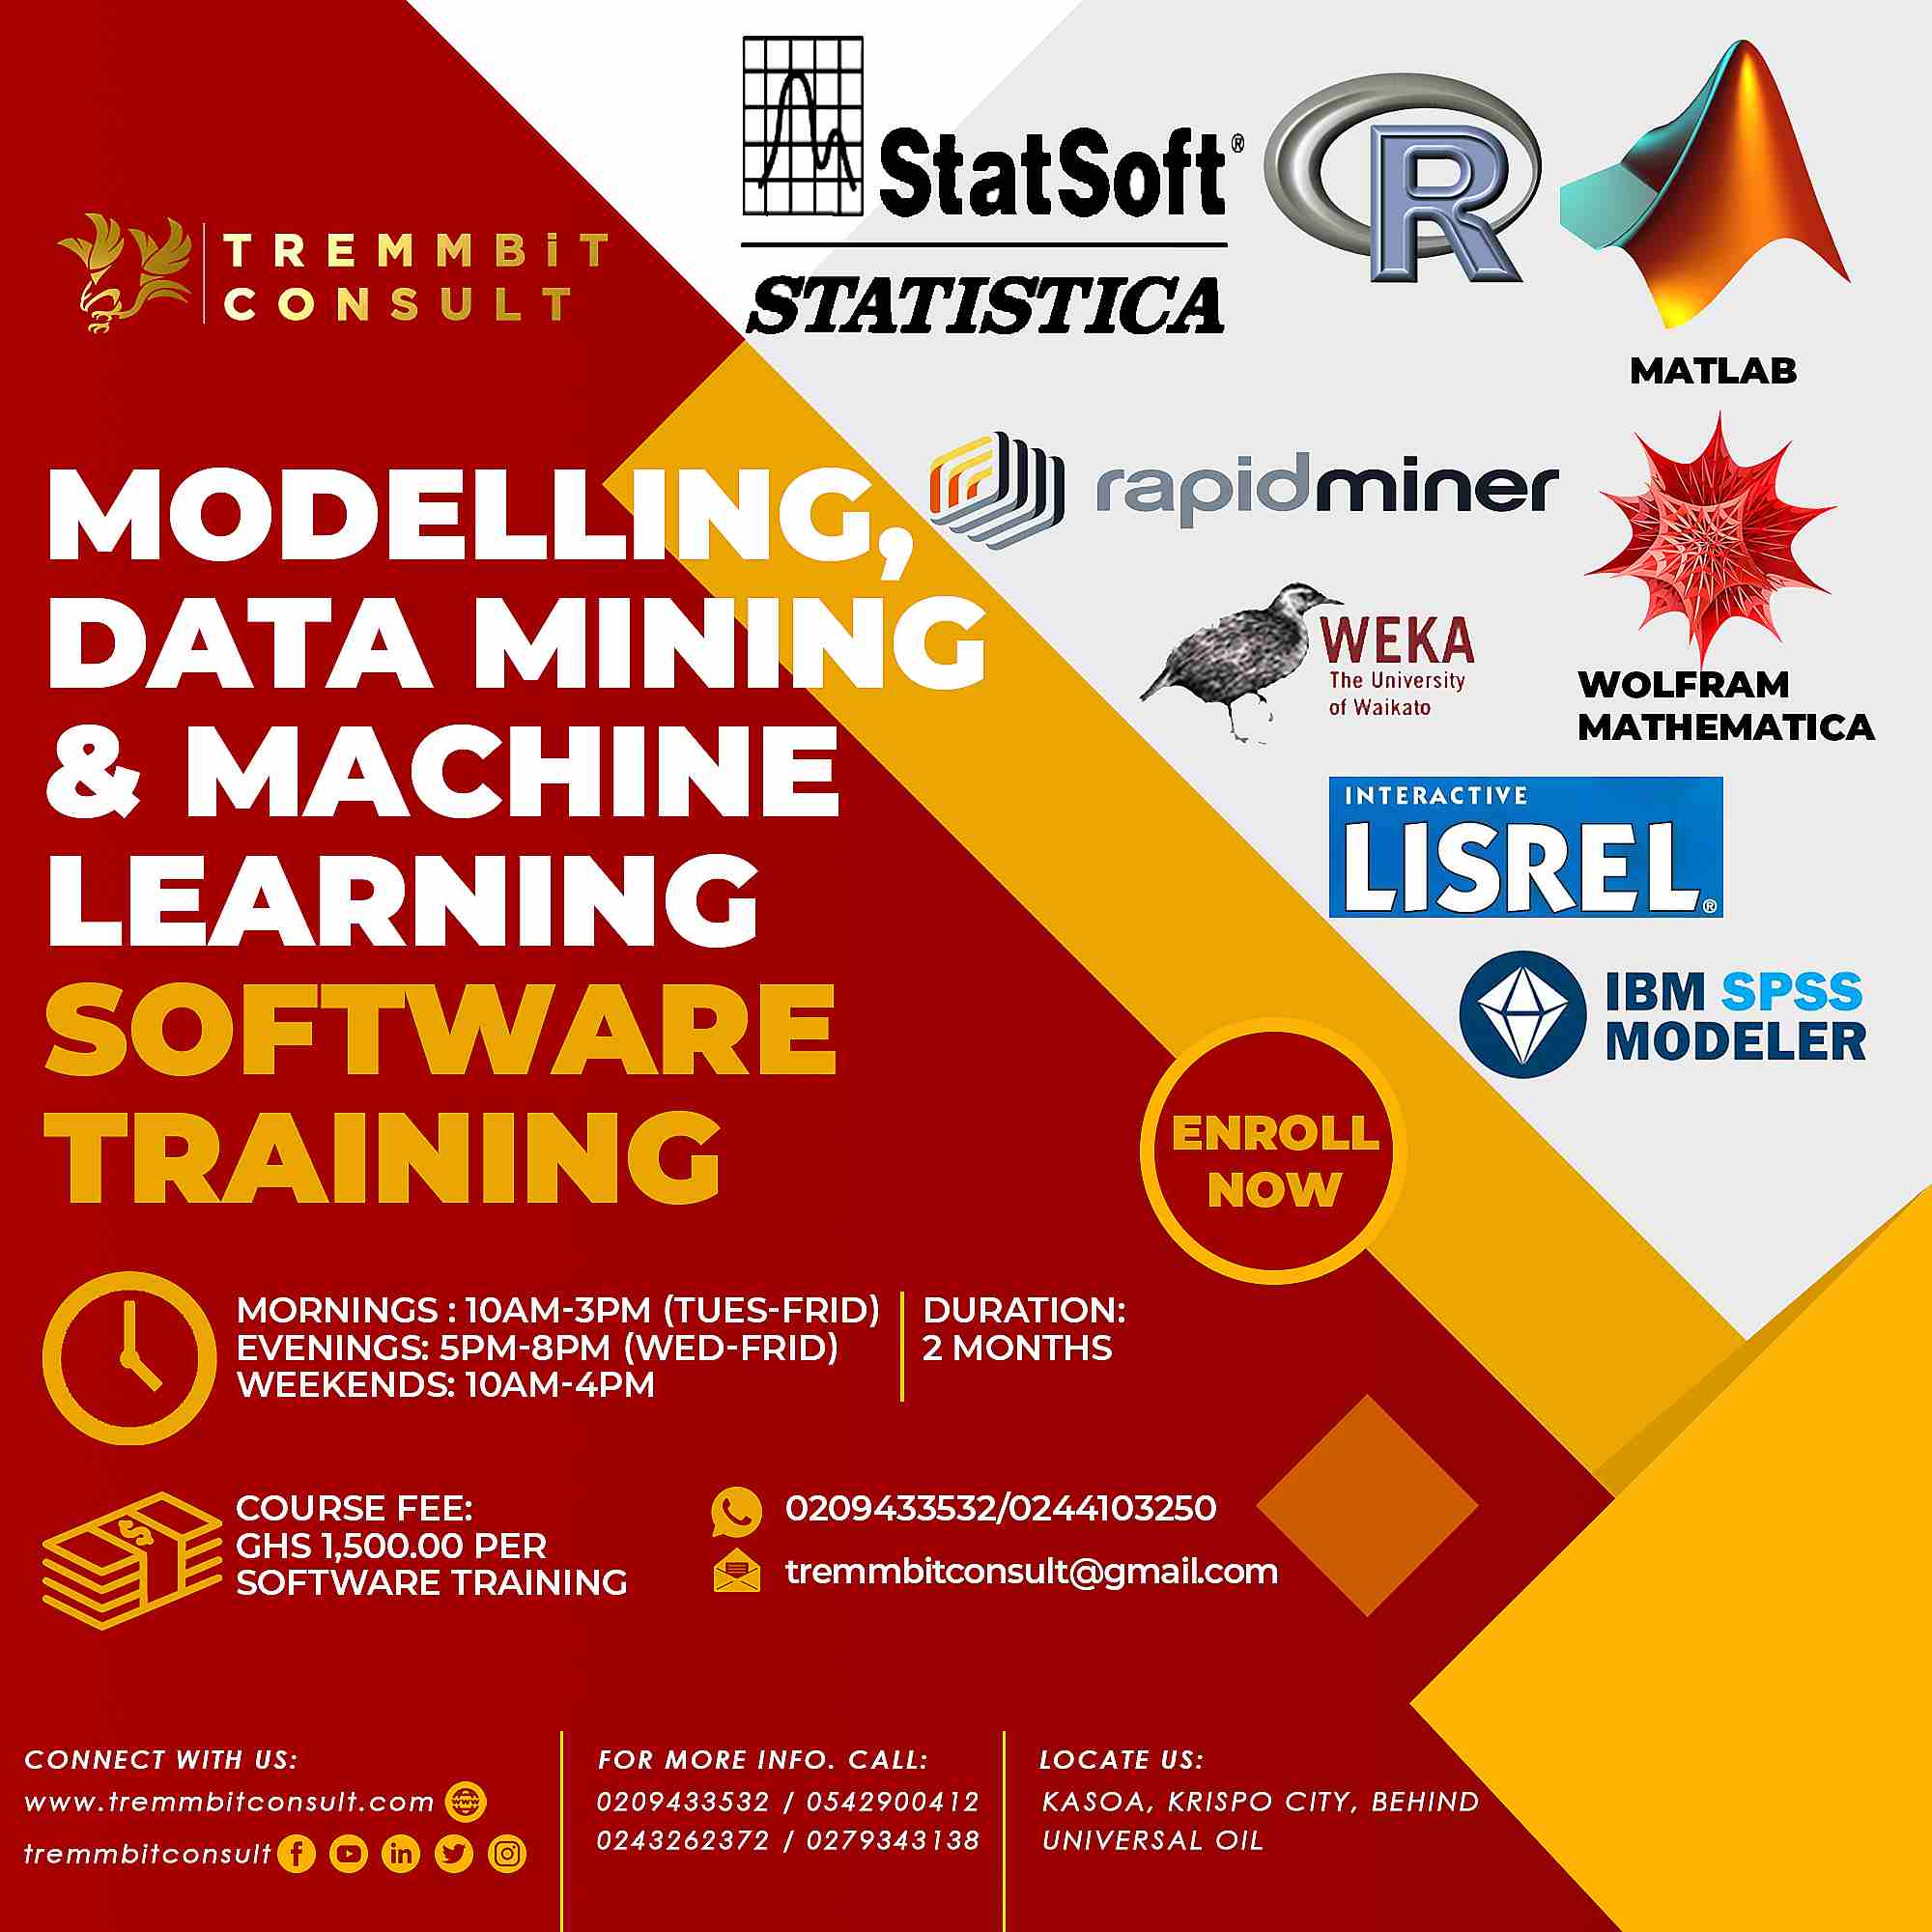 MODELLING,-DATA-MINING-&-MACHINE-LEARNING-SOFTWARE-TRAINING_compressed